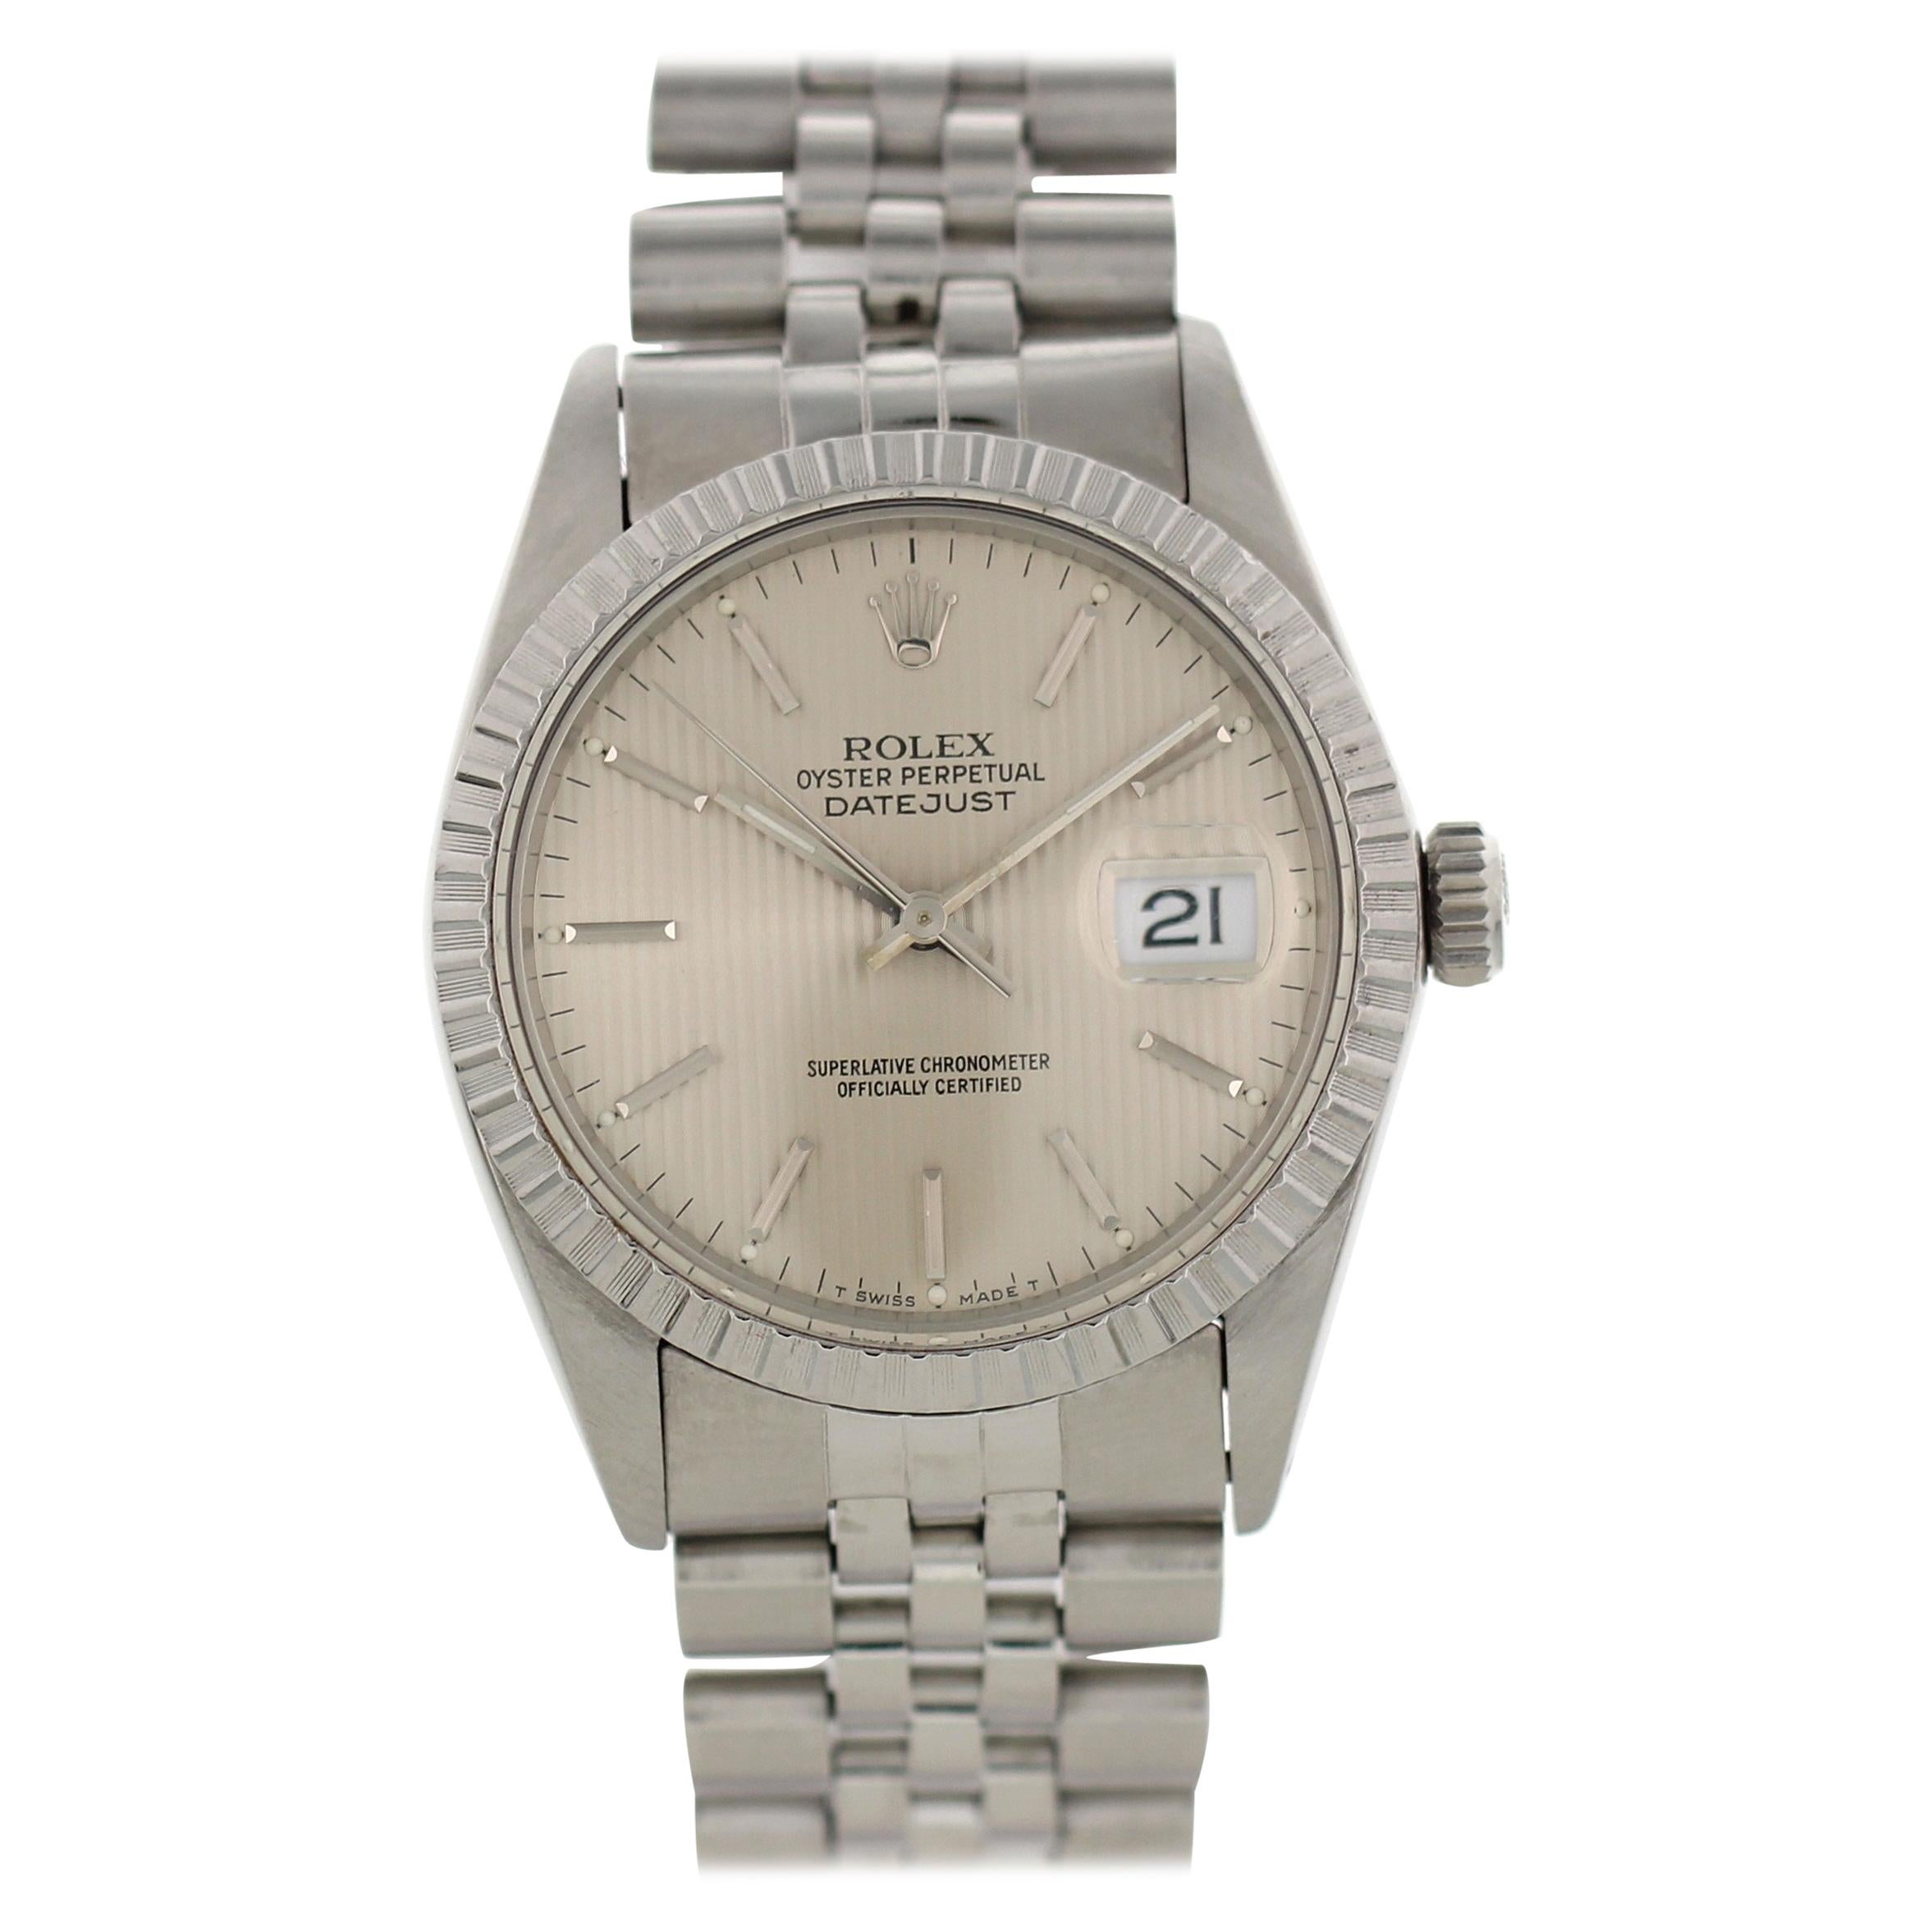 Rolex Oyster Perpetual Datejust 16030 Stainless Steel with Papers